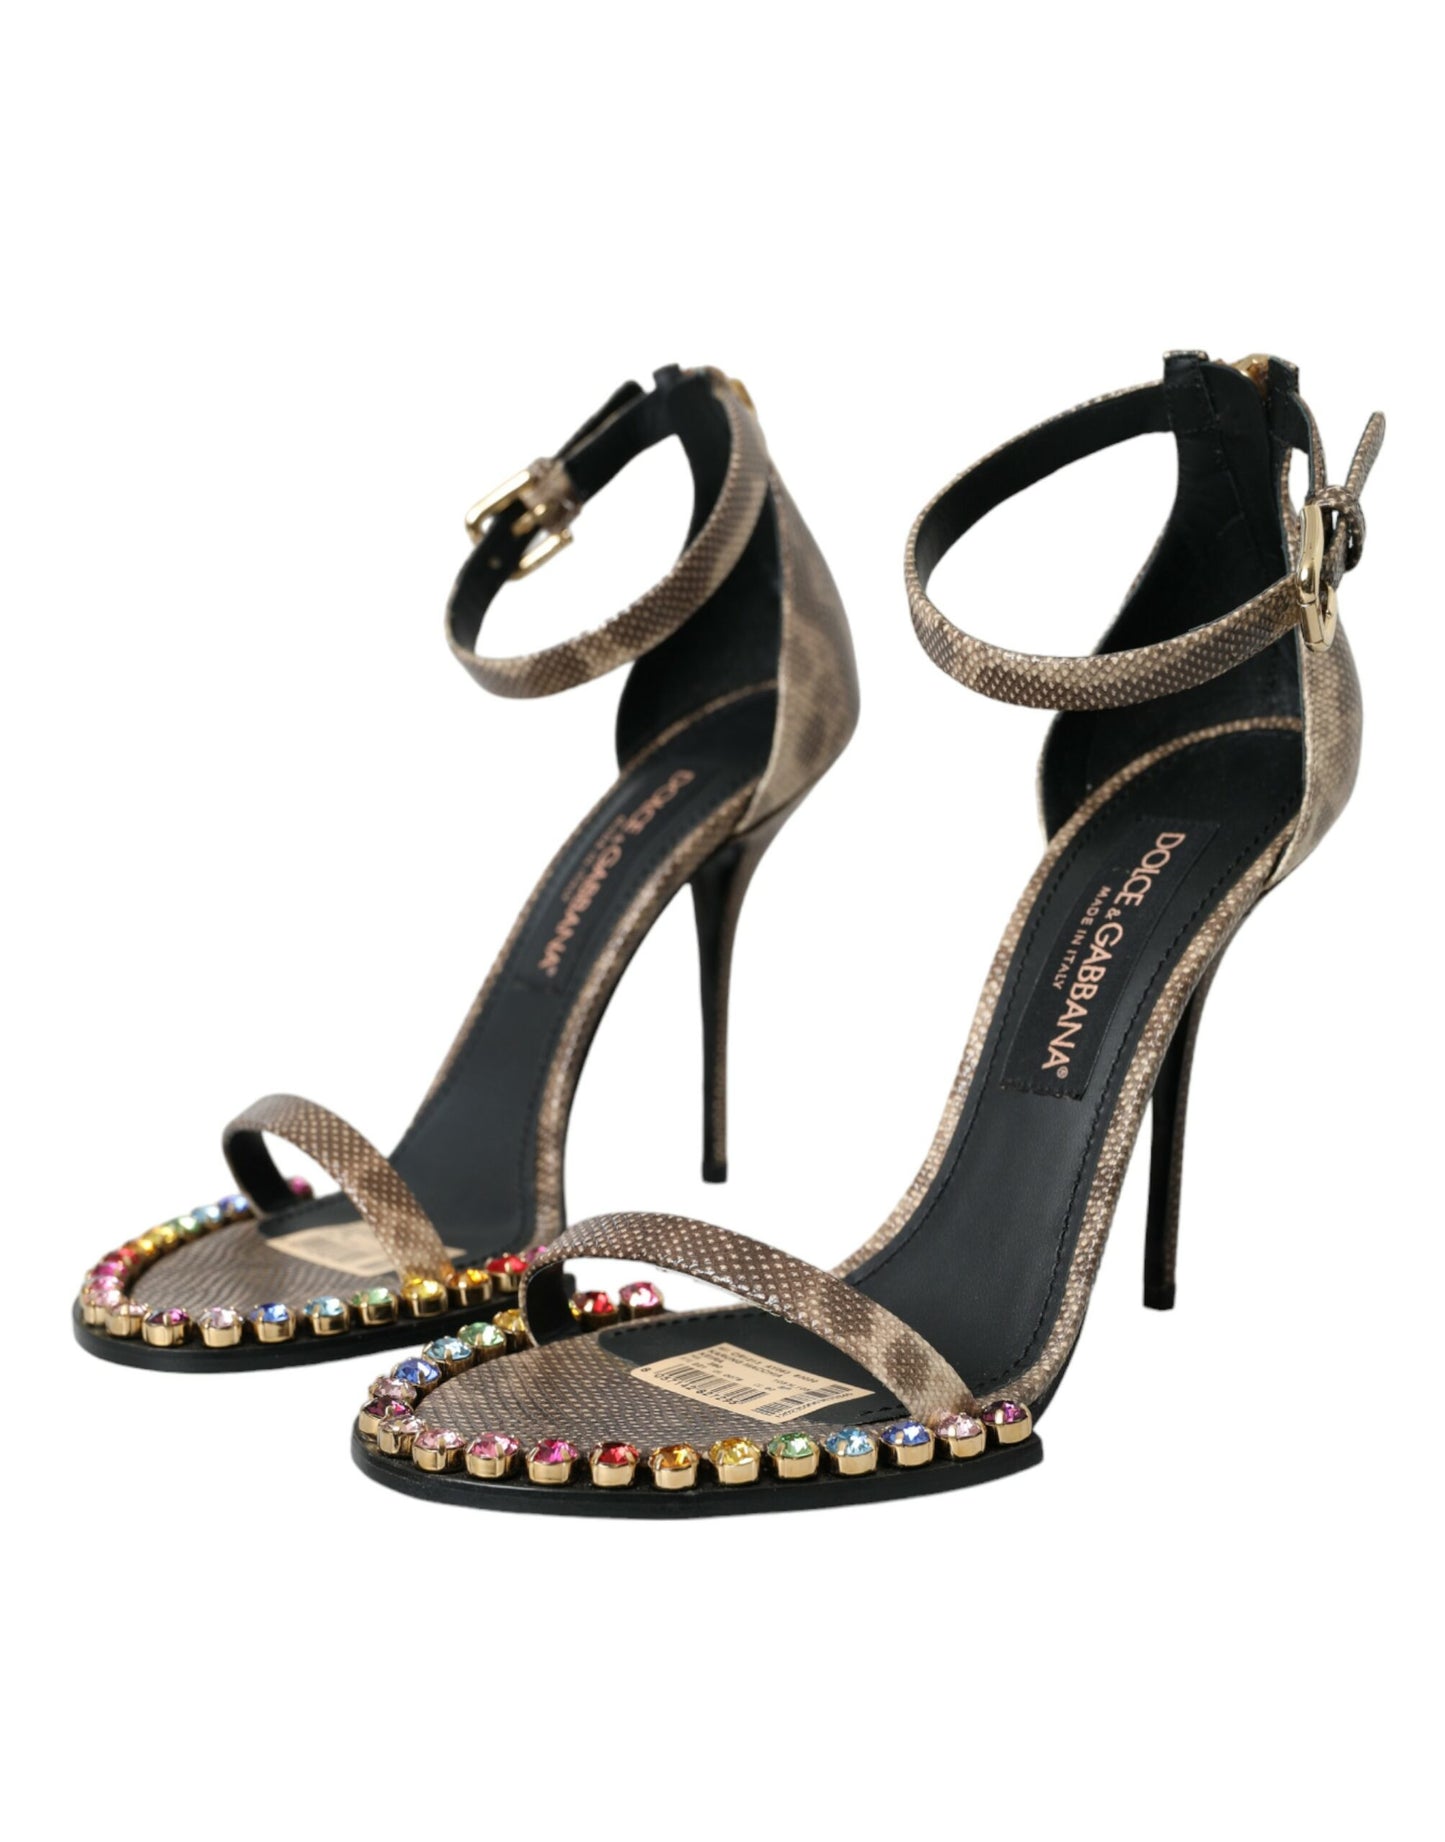 Dolce & Gabbana Brown Exotic Leather Crystal Sandals Shoes